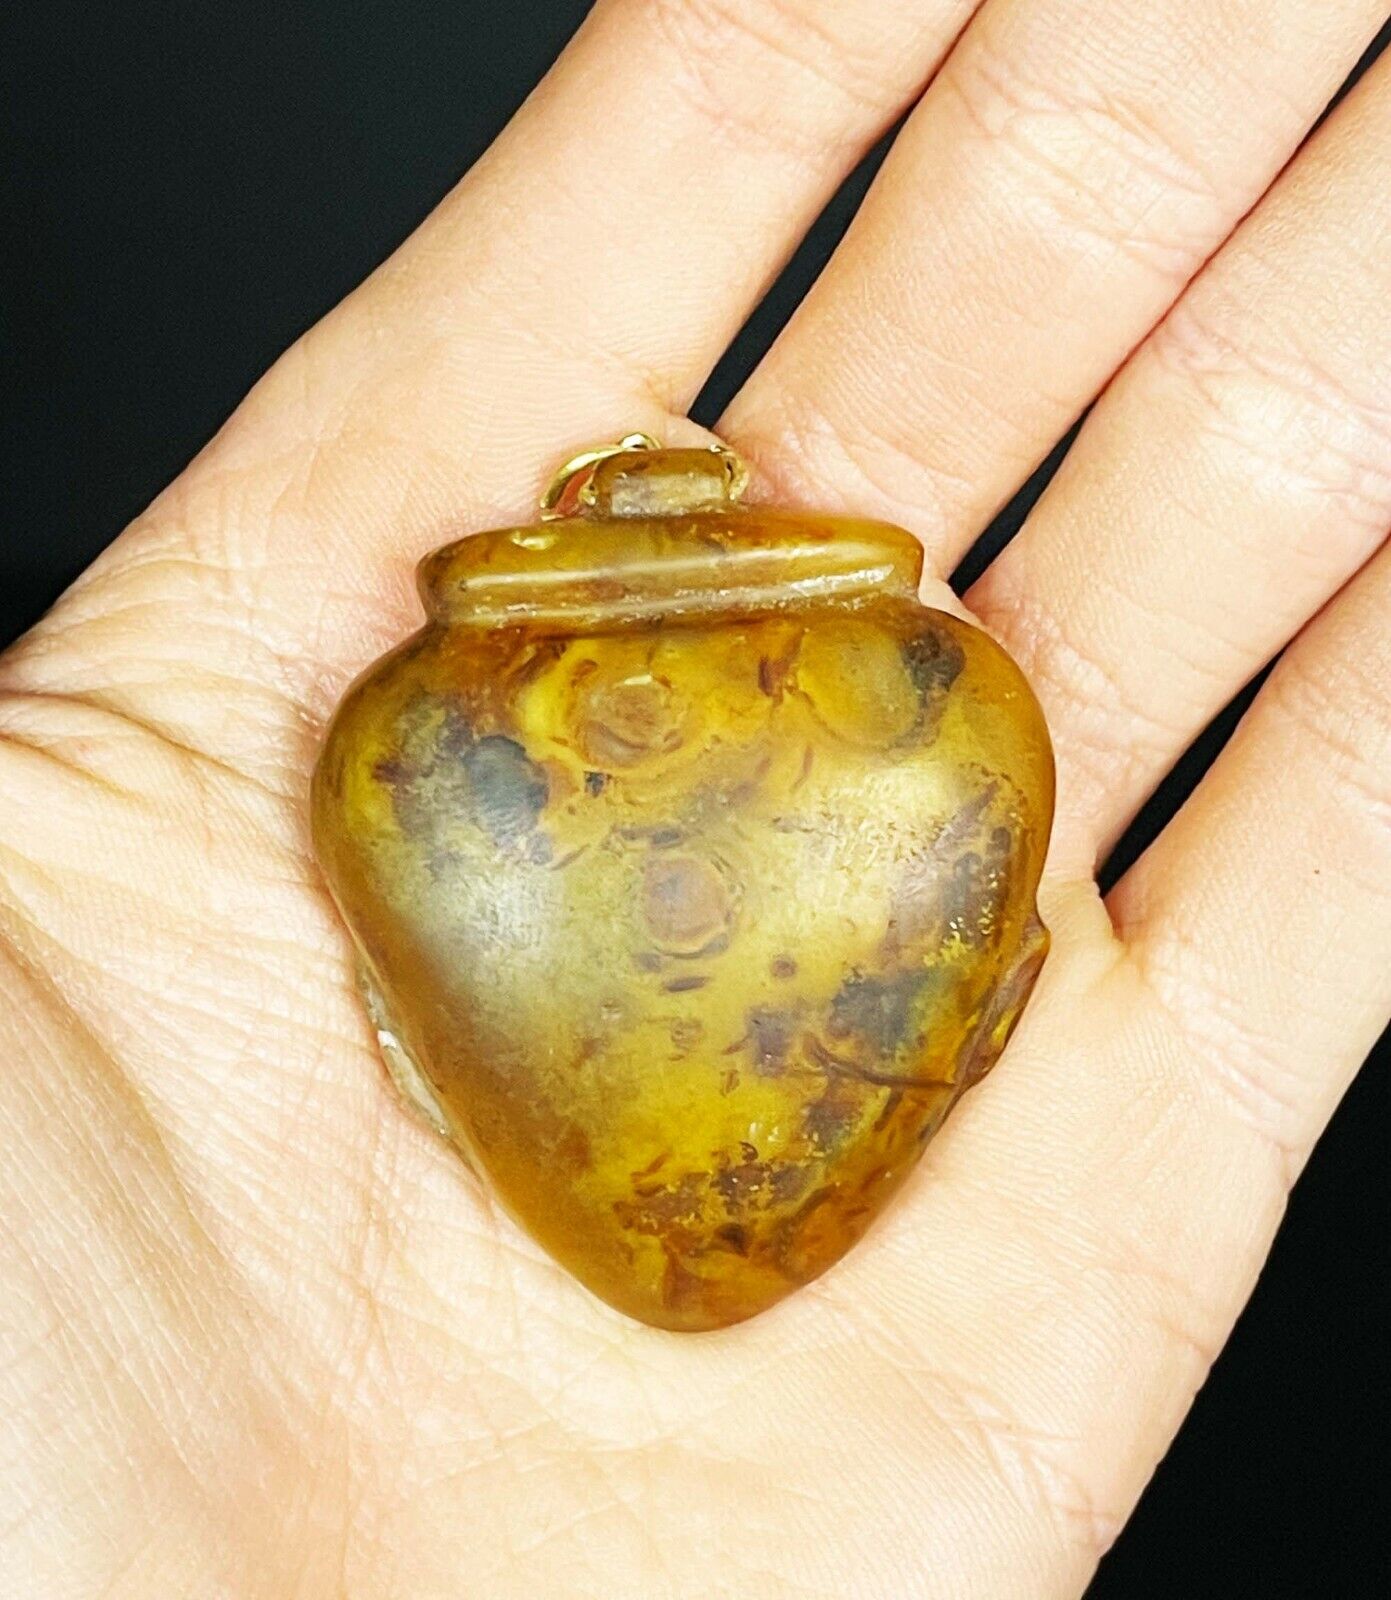 Handmade Egyptian Heart Amulet made from Agate stone - handmade accessories